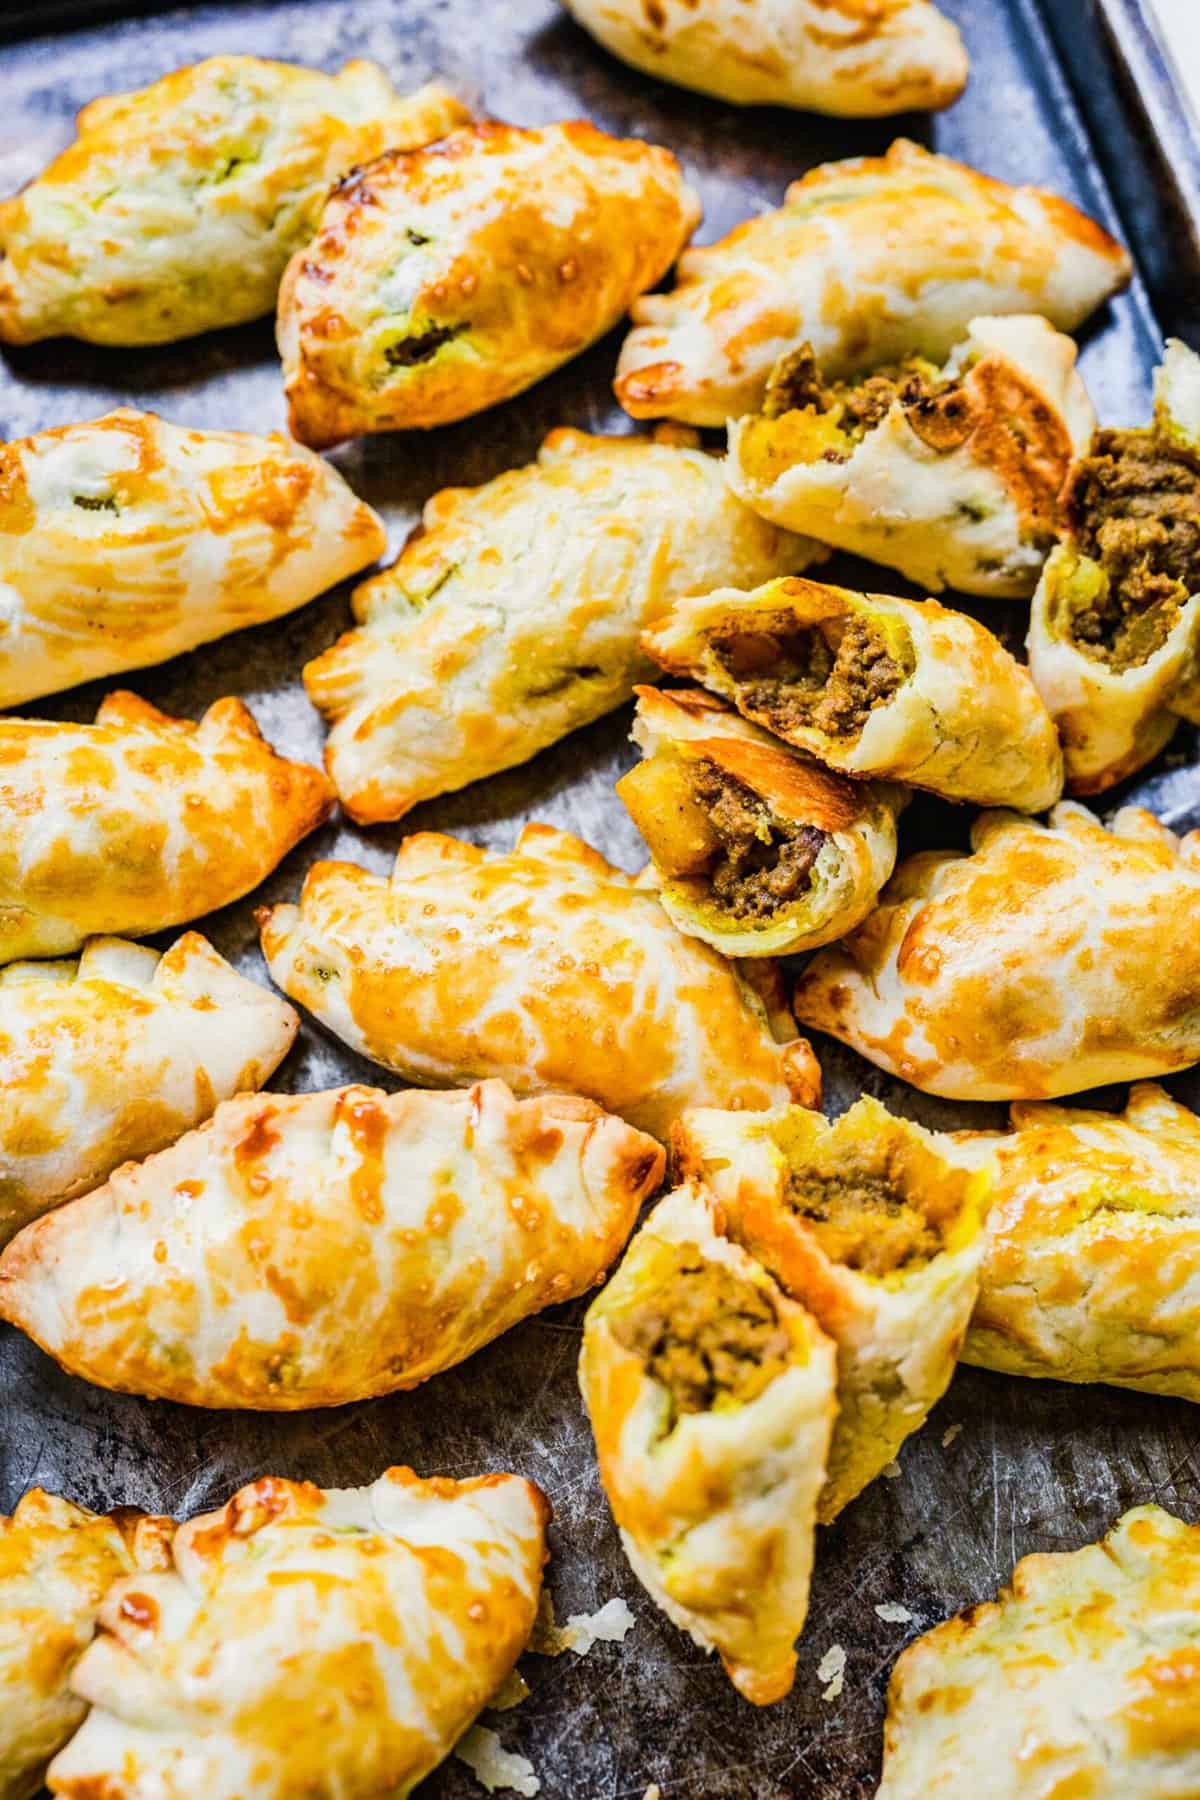 Chinese curry pockets on baking sheet, with some cut open to show filling